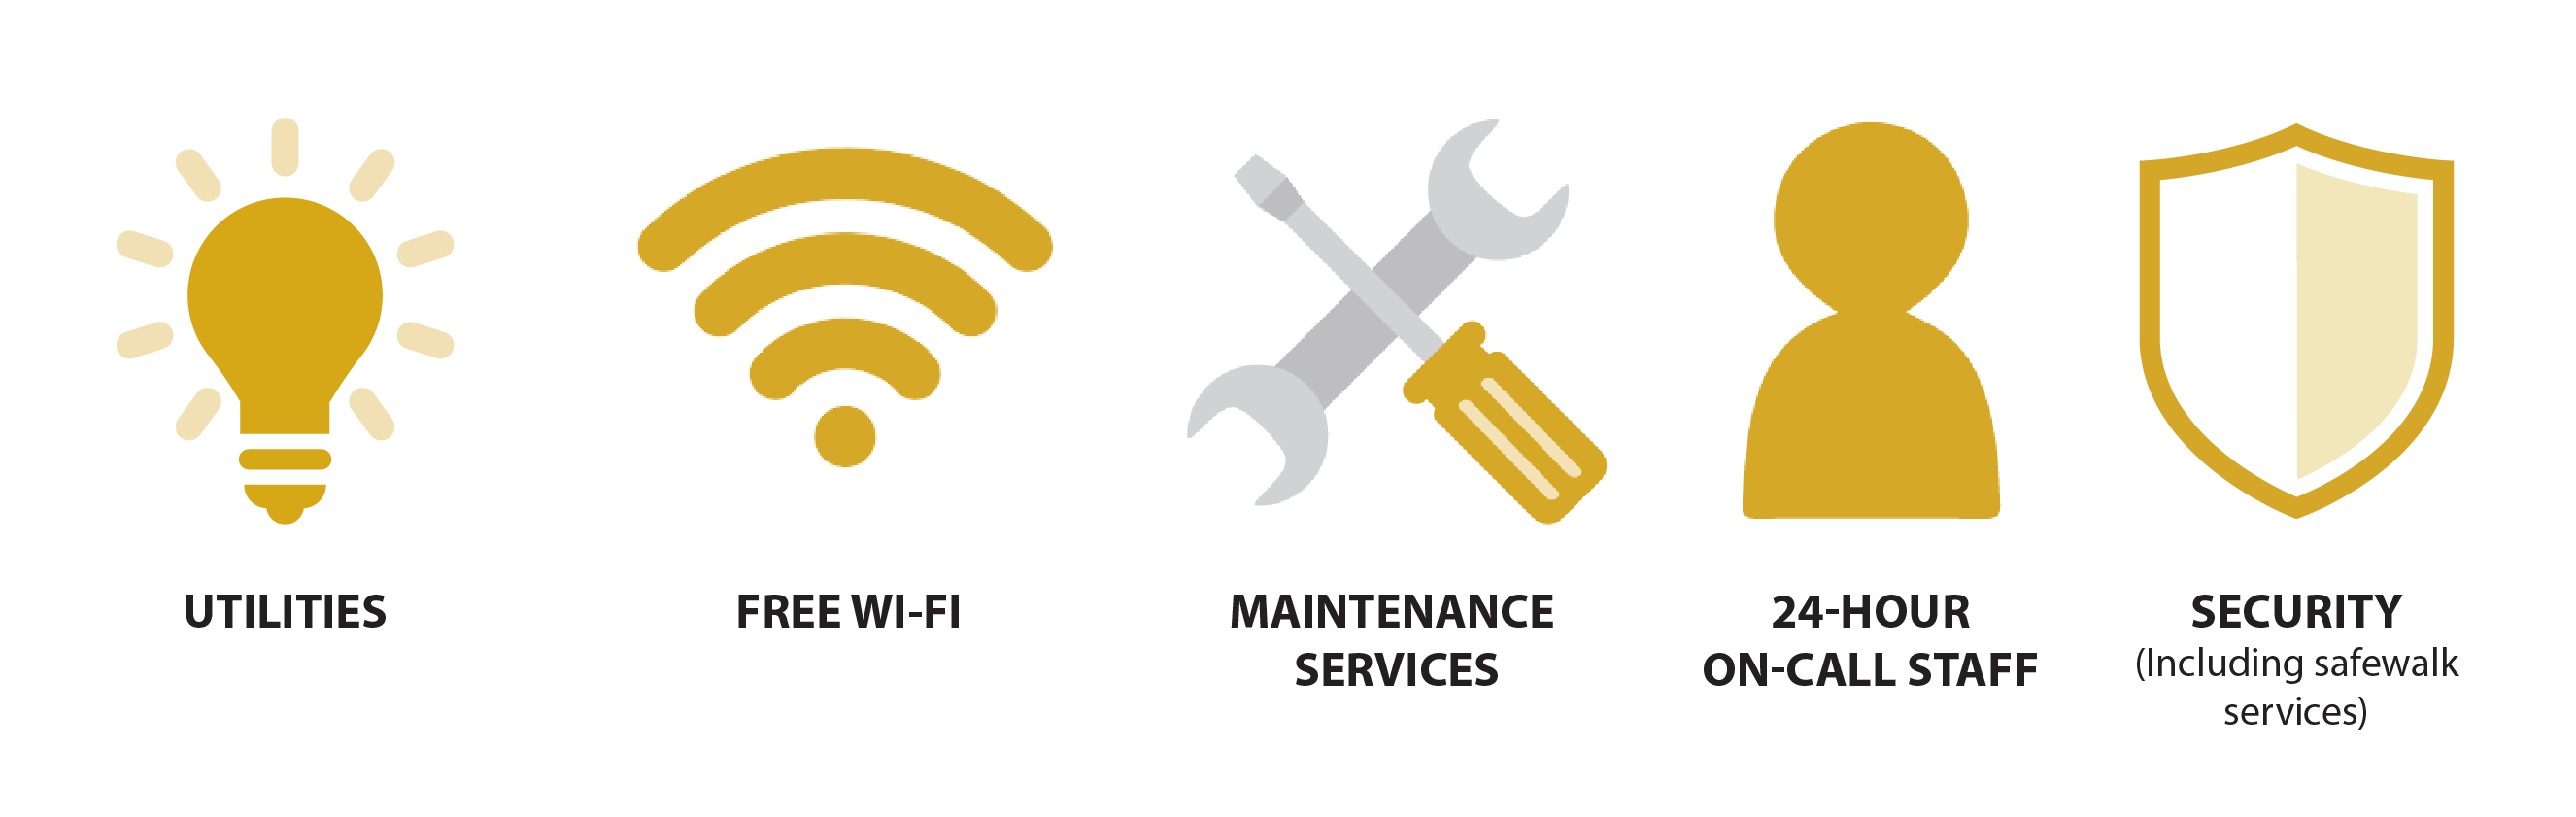 utilities, Wi-Fi, maintenance services, 24 hour on-call staff, security (including safewalk services)